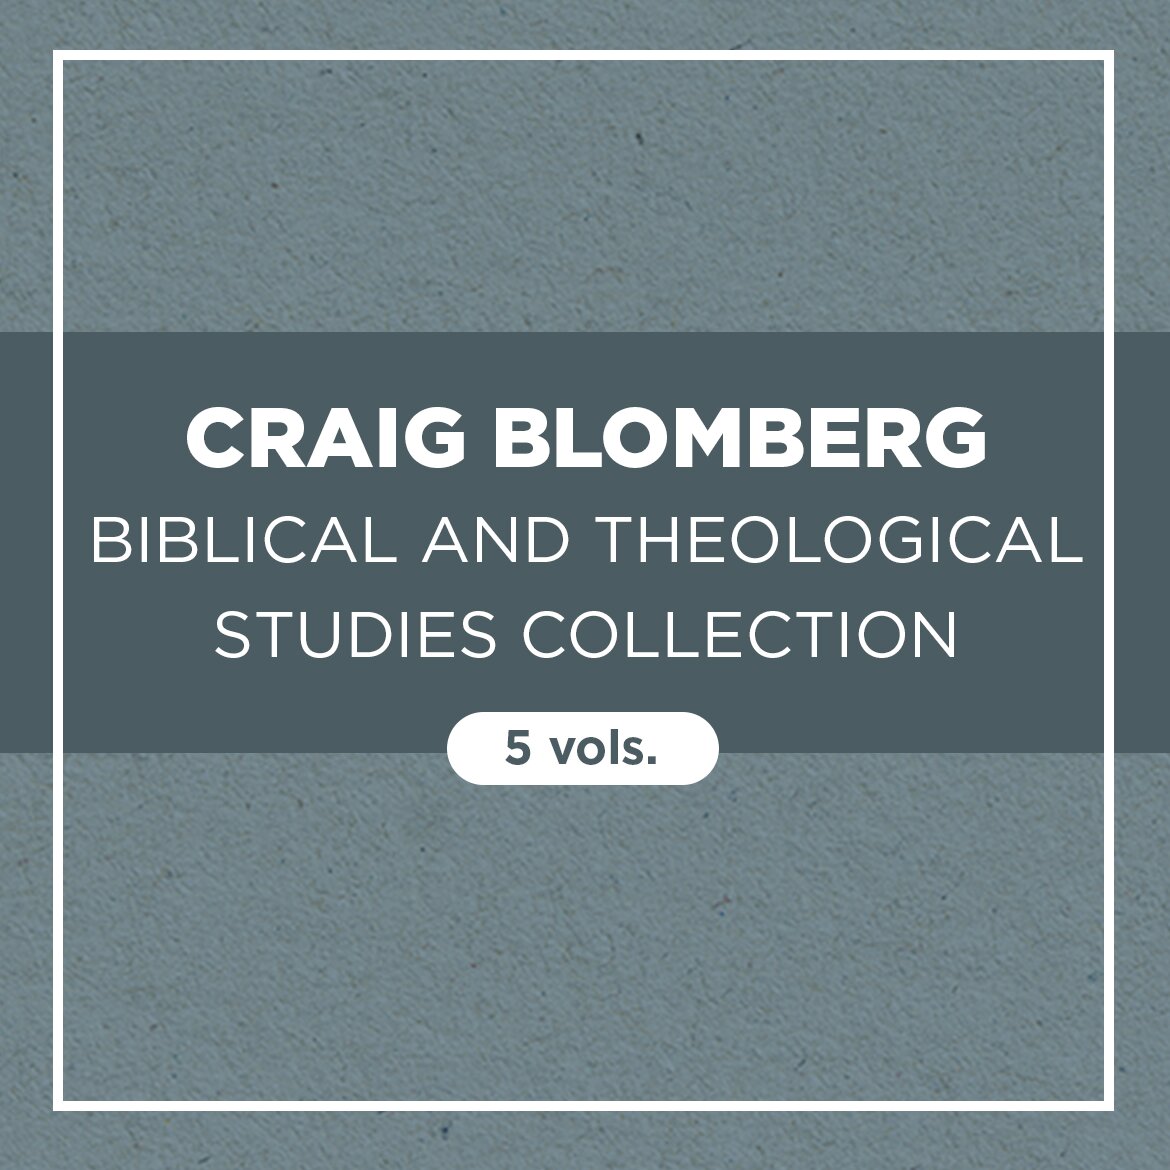 Craig Blomberg Biblical and Theological Studies Collection (5 vols.)